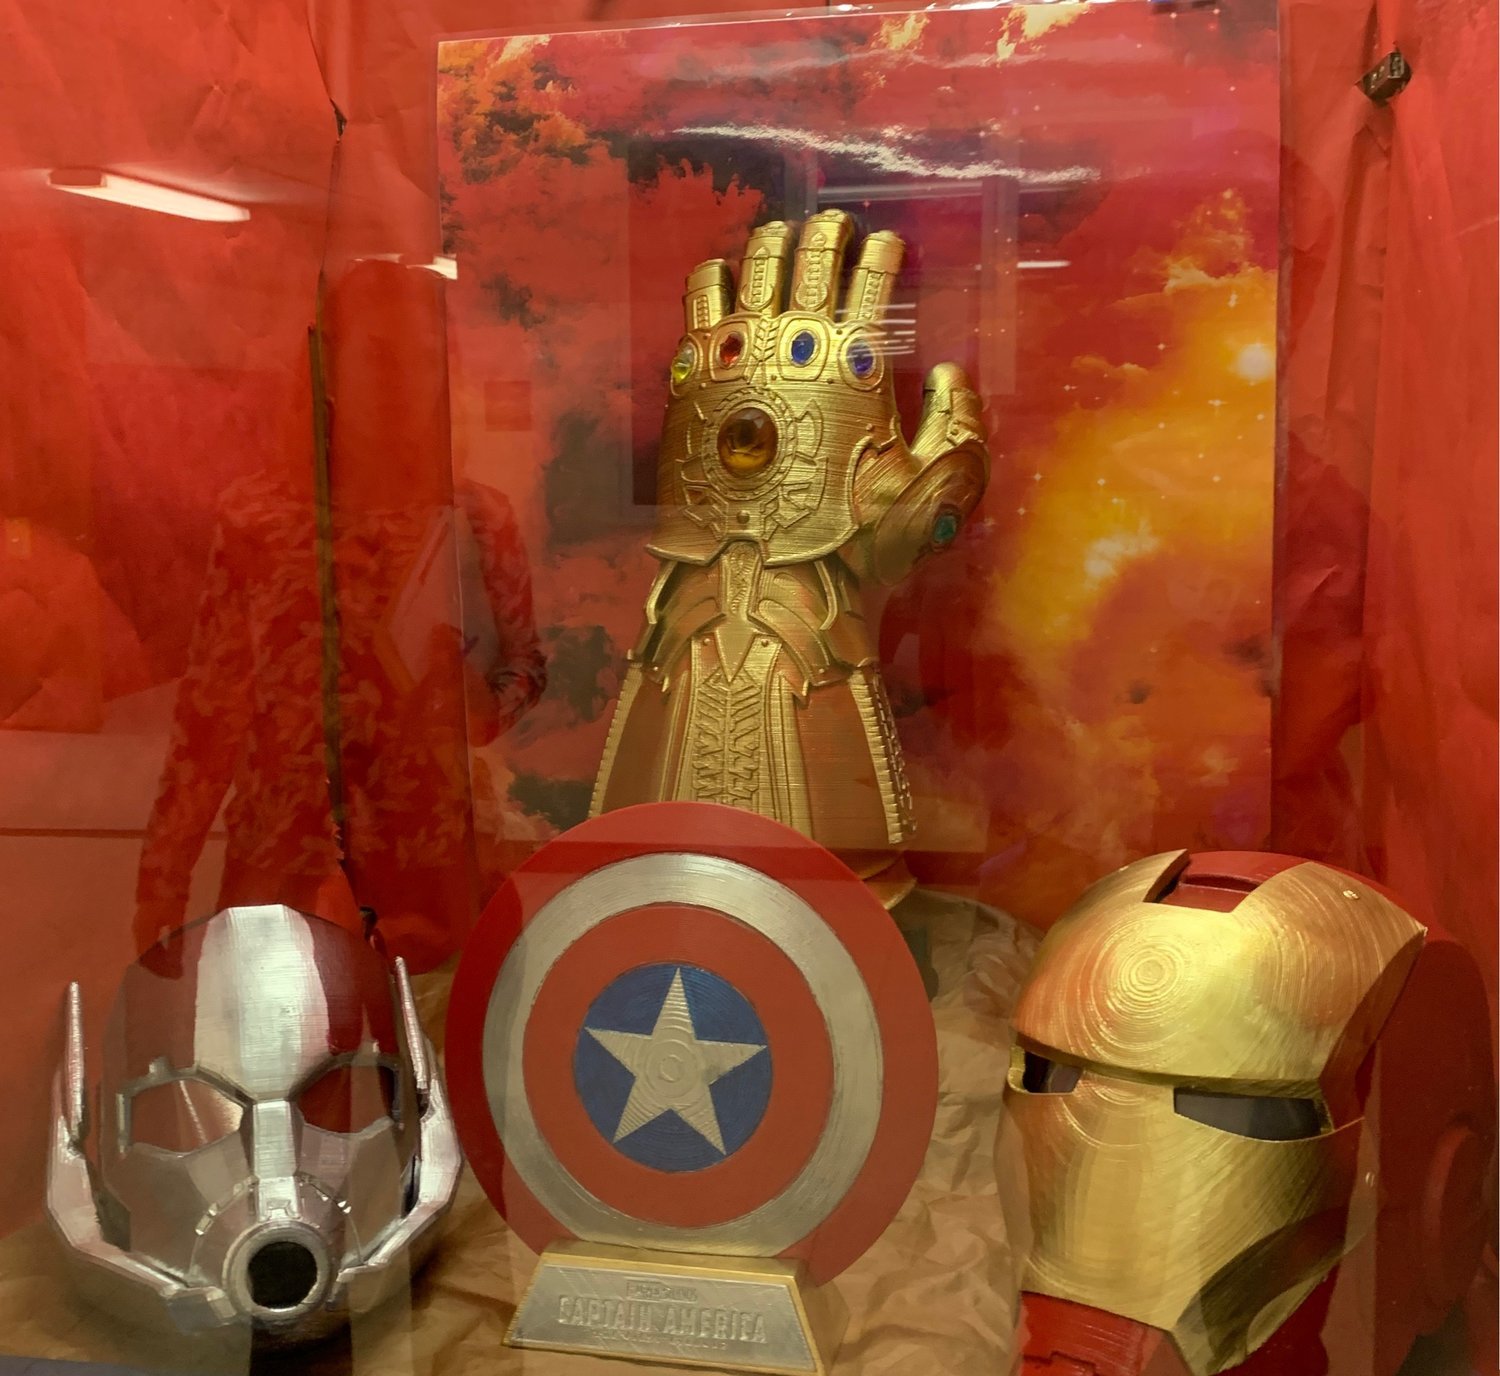 Quitman High School STEM students have made various projects from 3D printed materials. On display in the library window are some of the projects (left to right): Ant Man mask, Captain American shield, Infinity Gauntlet and an Iron Man mask. The creations go along with the Avengers theme of this year’s high school yearbook.